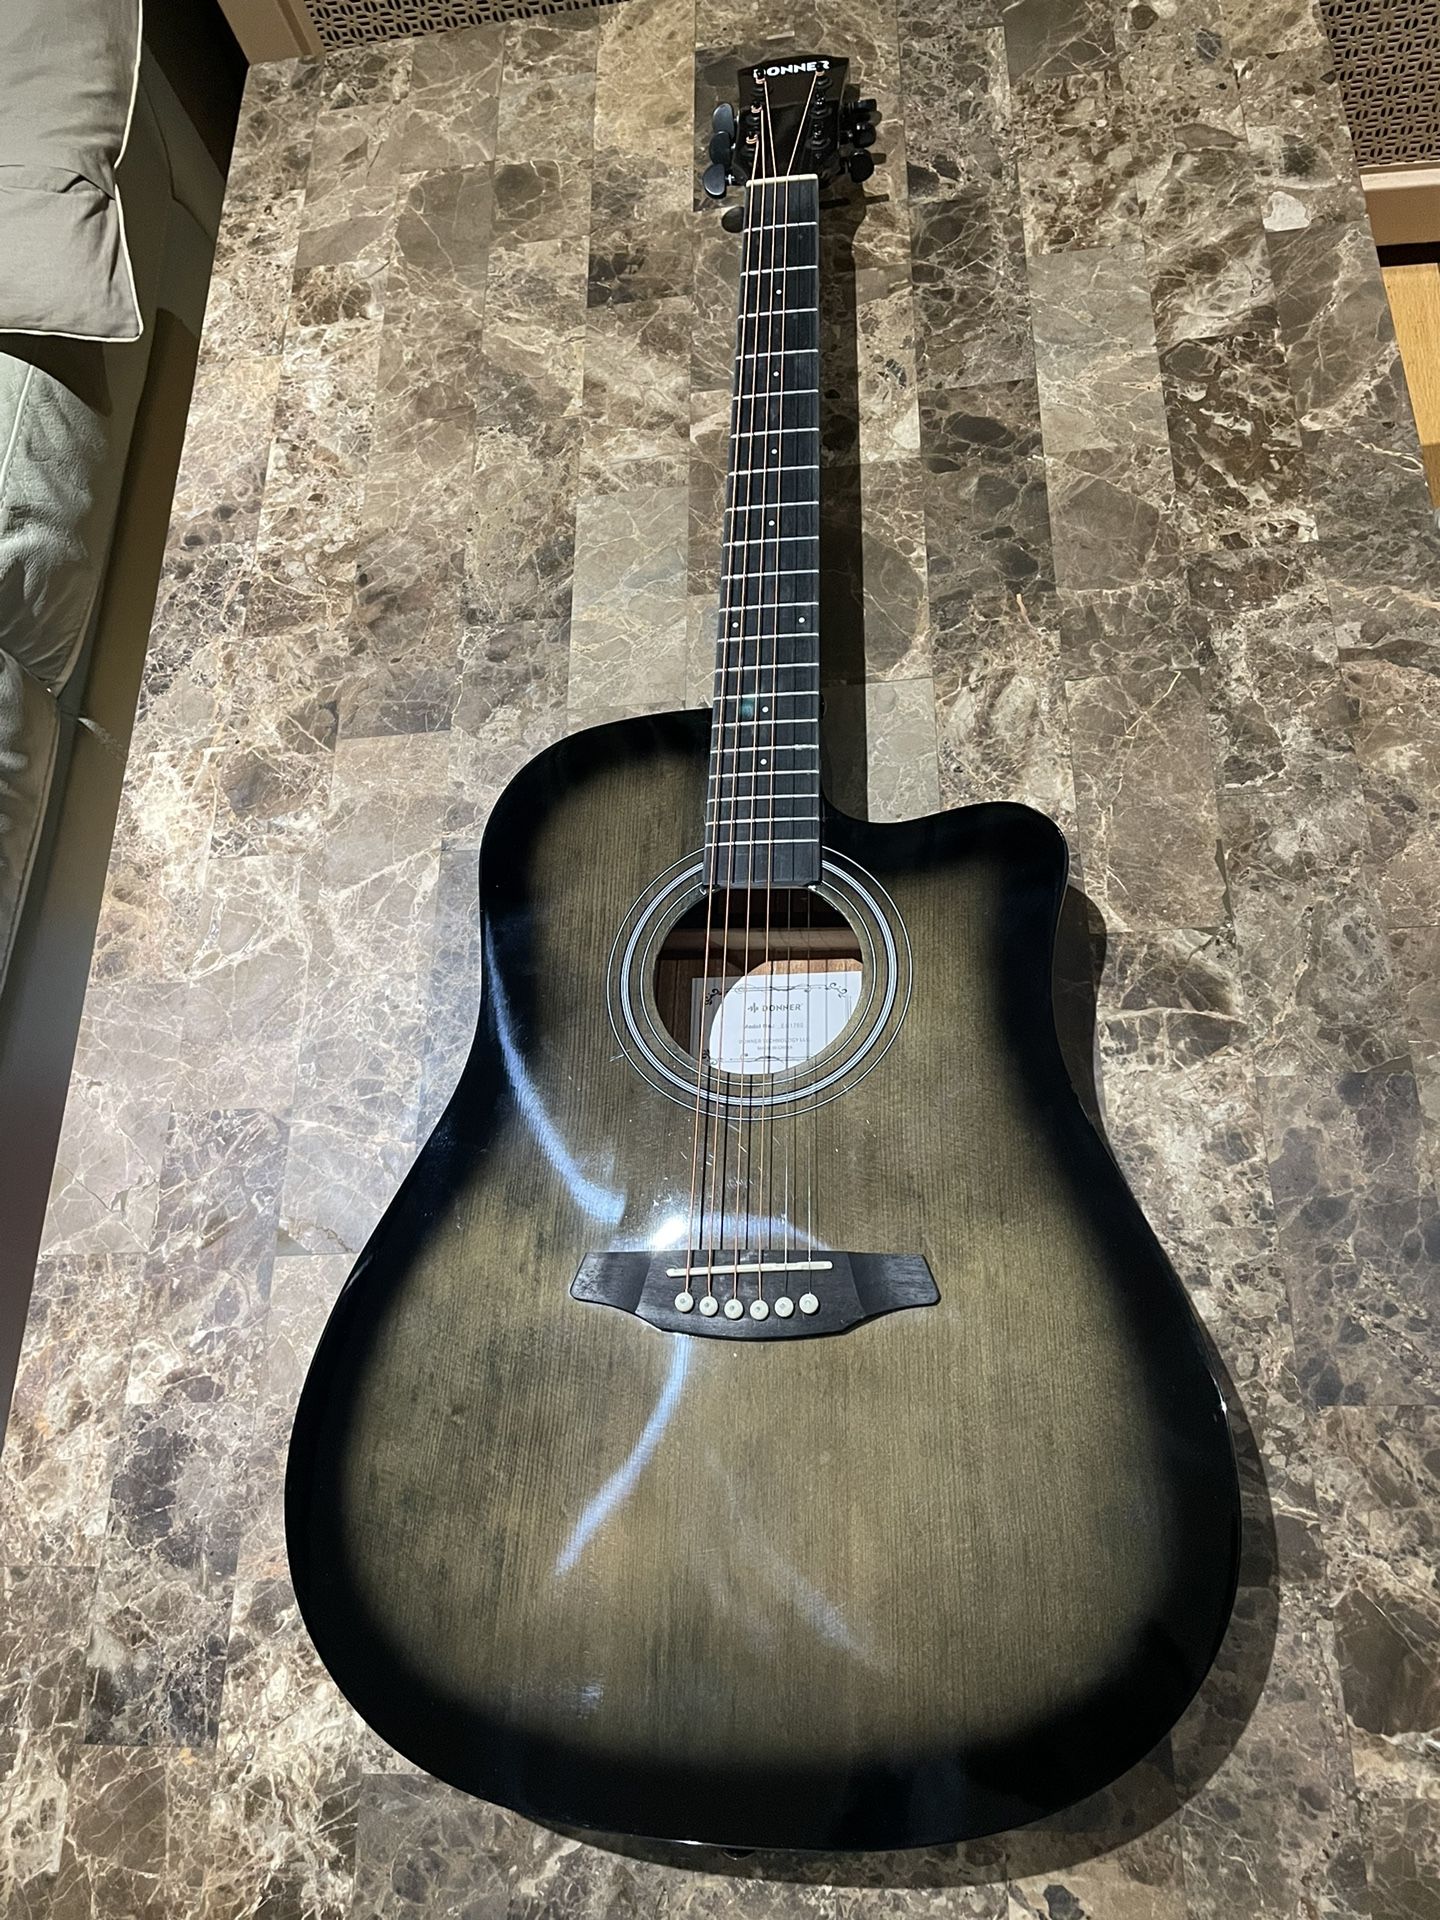 Donner electric guitar with case for Sale in Brooklyn, NY - OfferUp